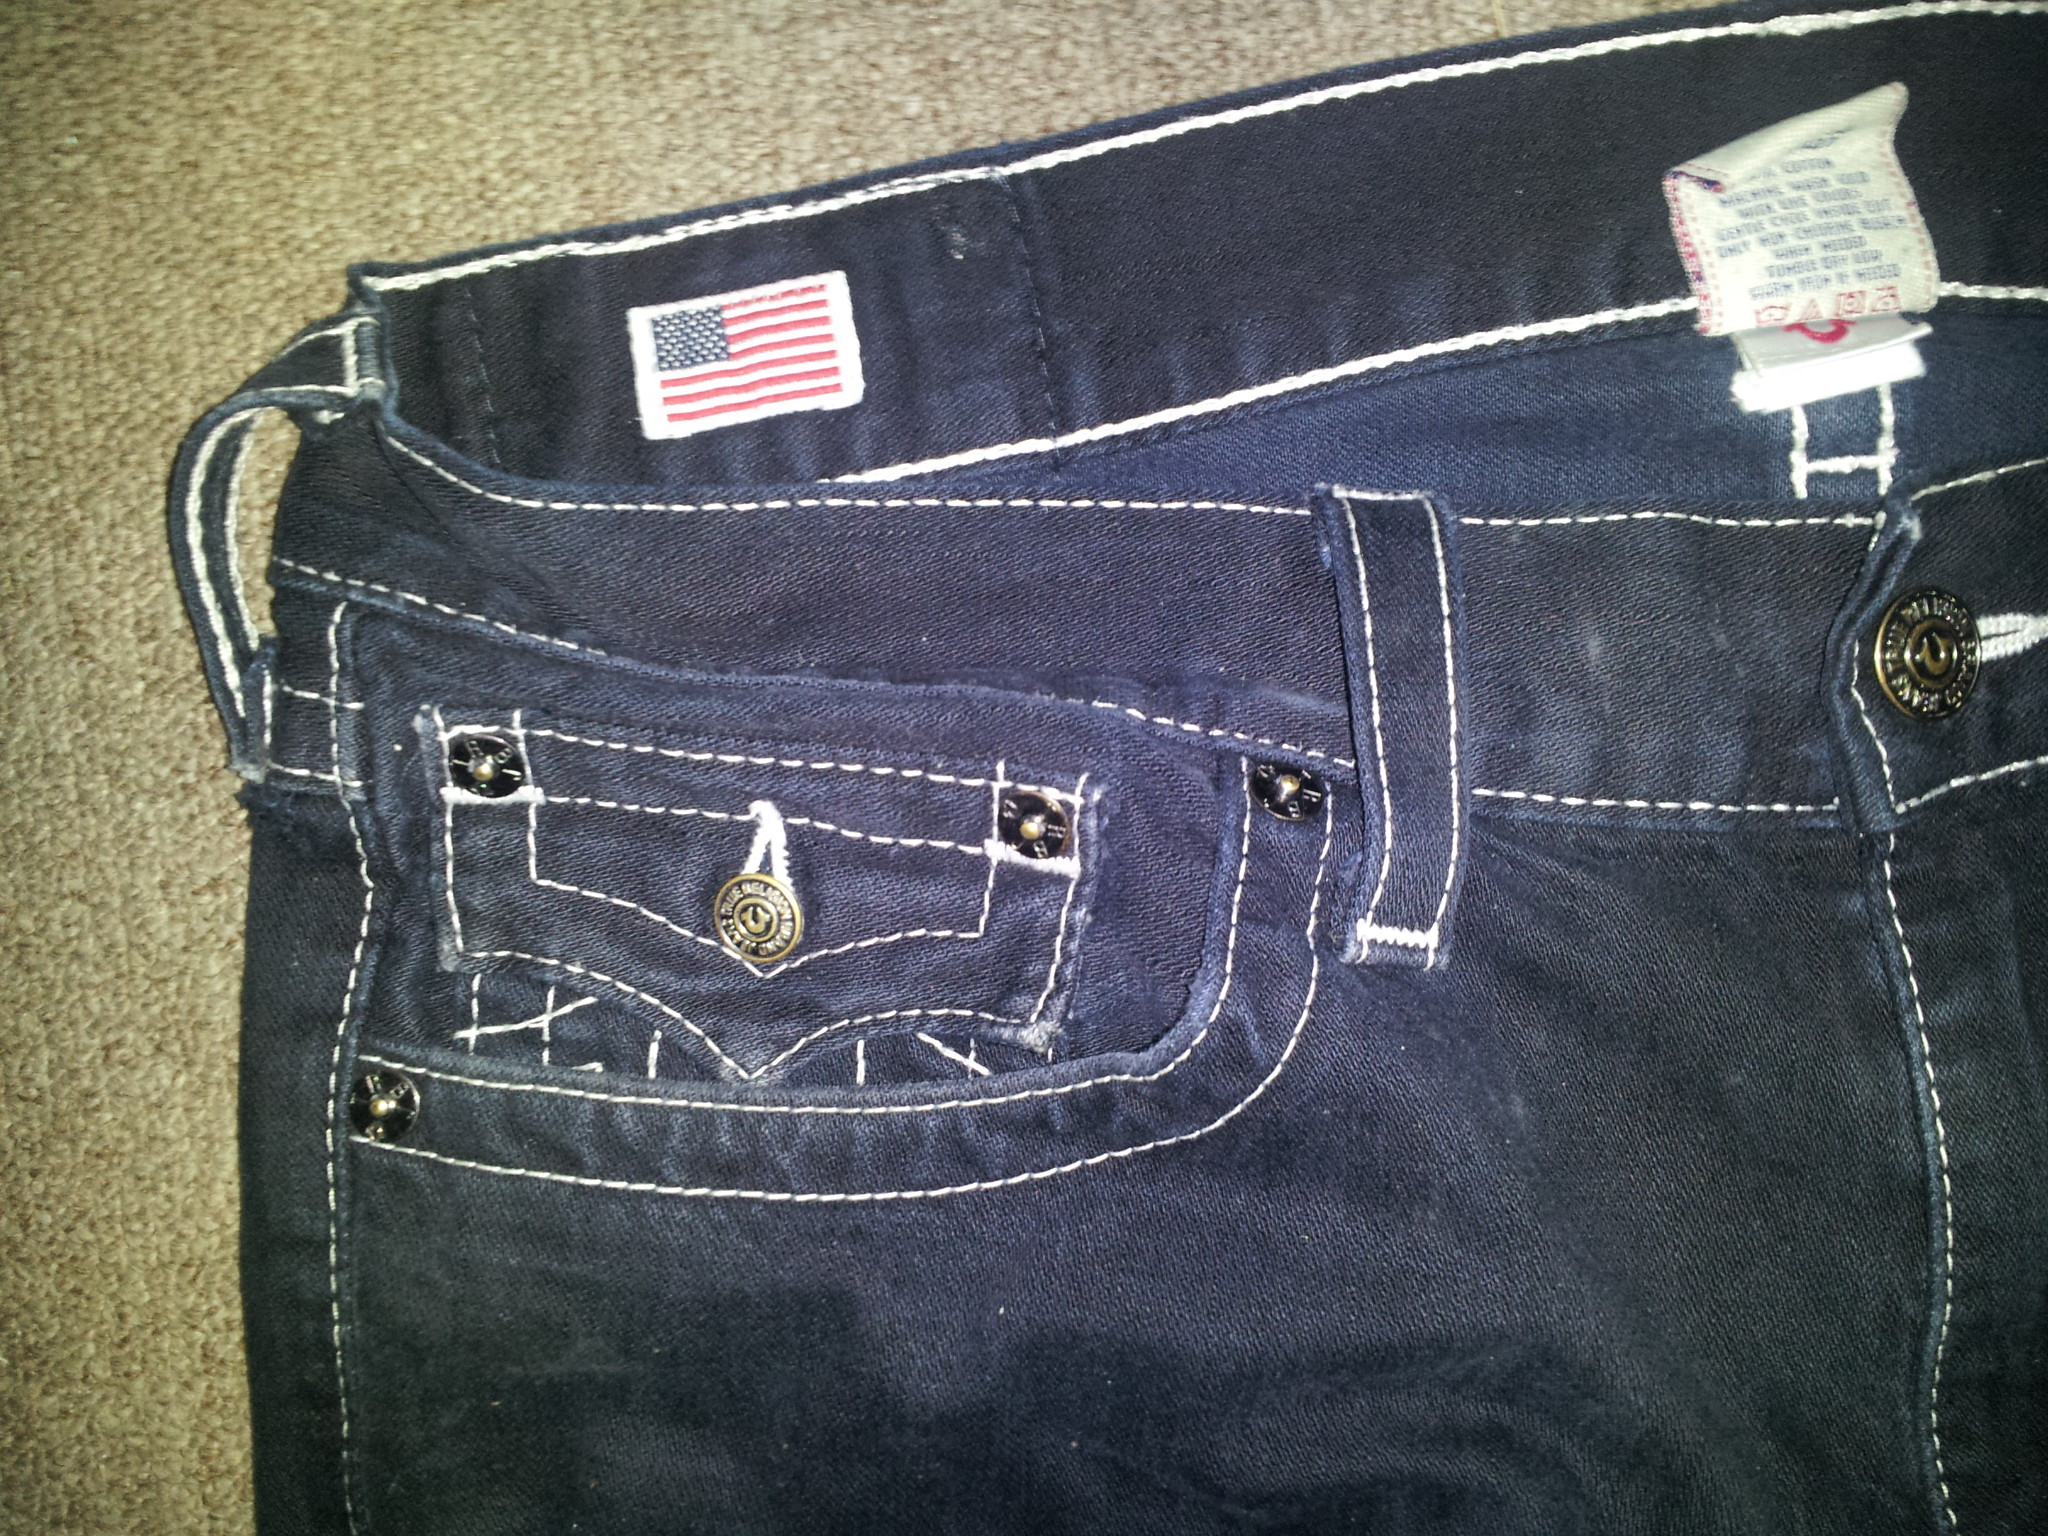 2048x1536 Can TRUE RELIGION Jeans have a ROUNDED FLAP POCKET... - The eBay Community